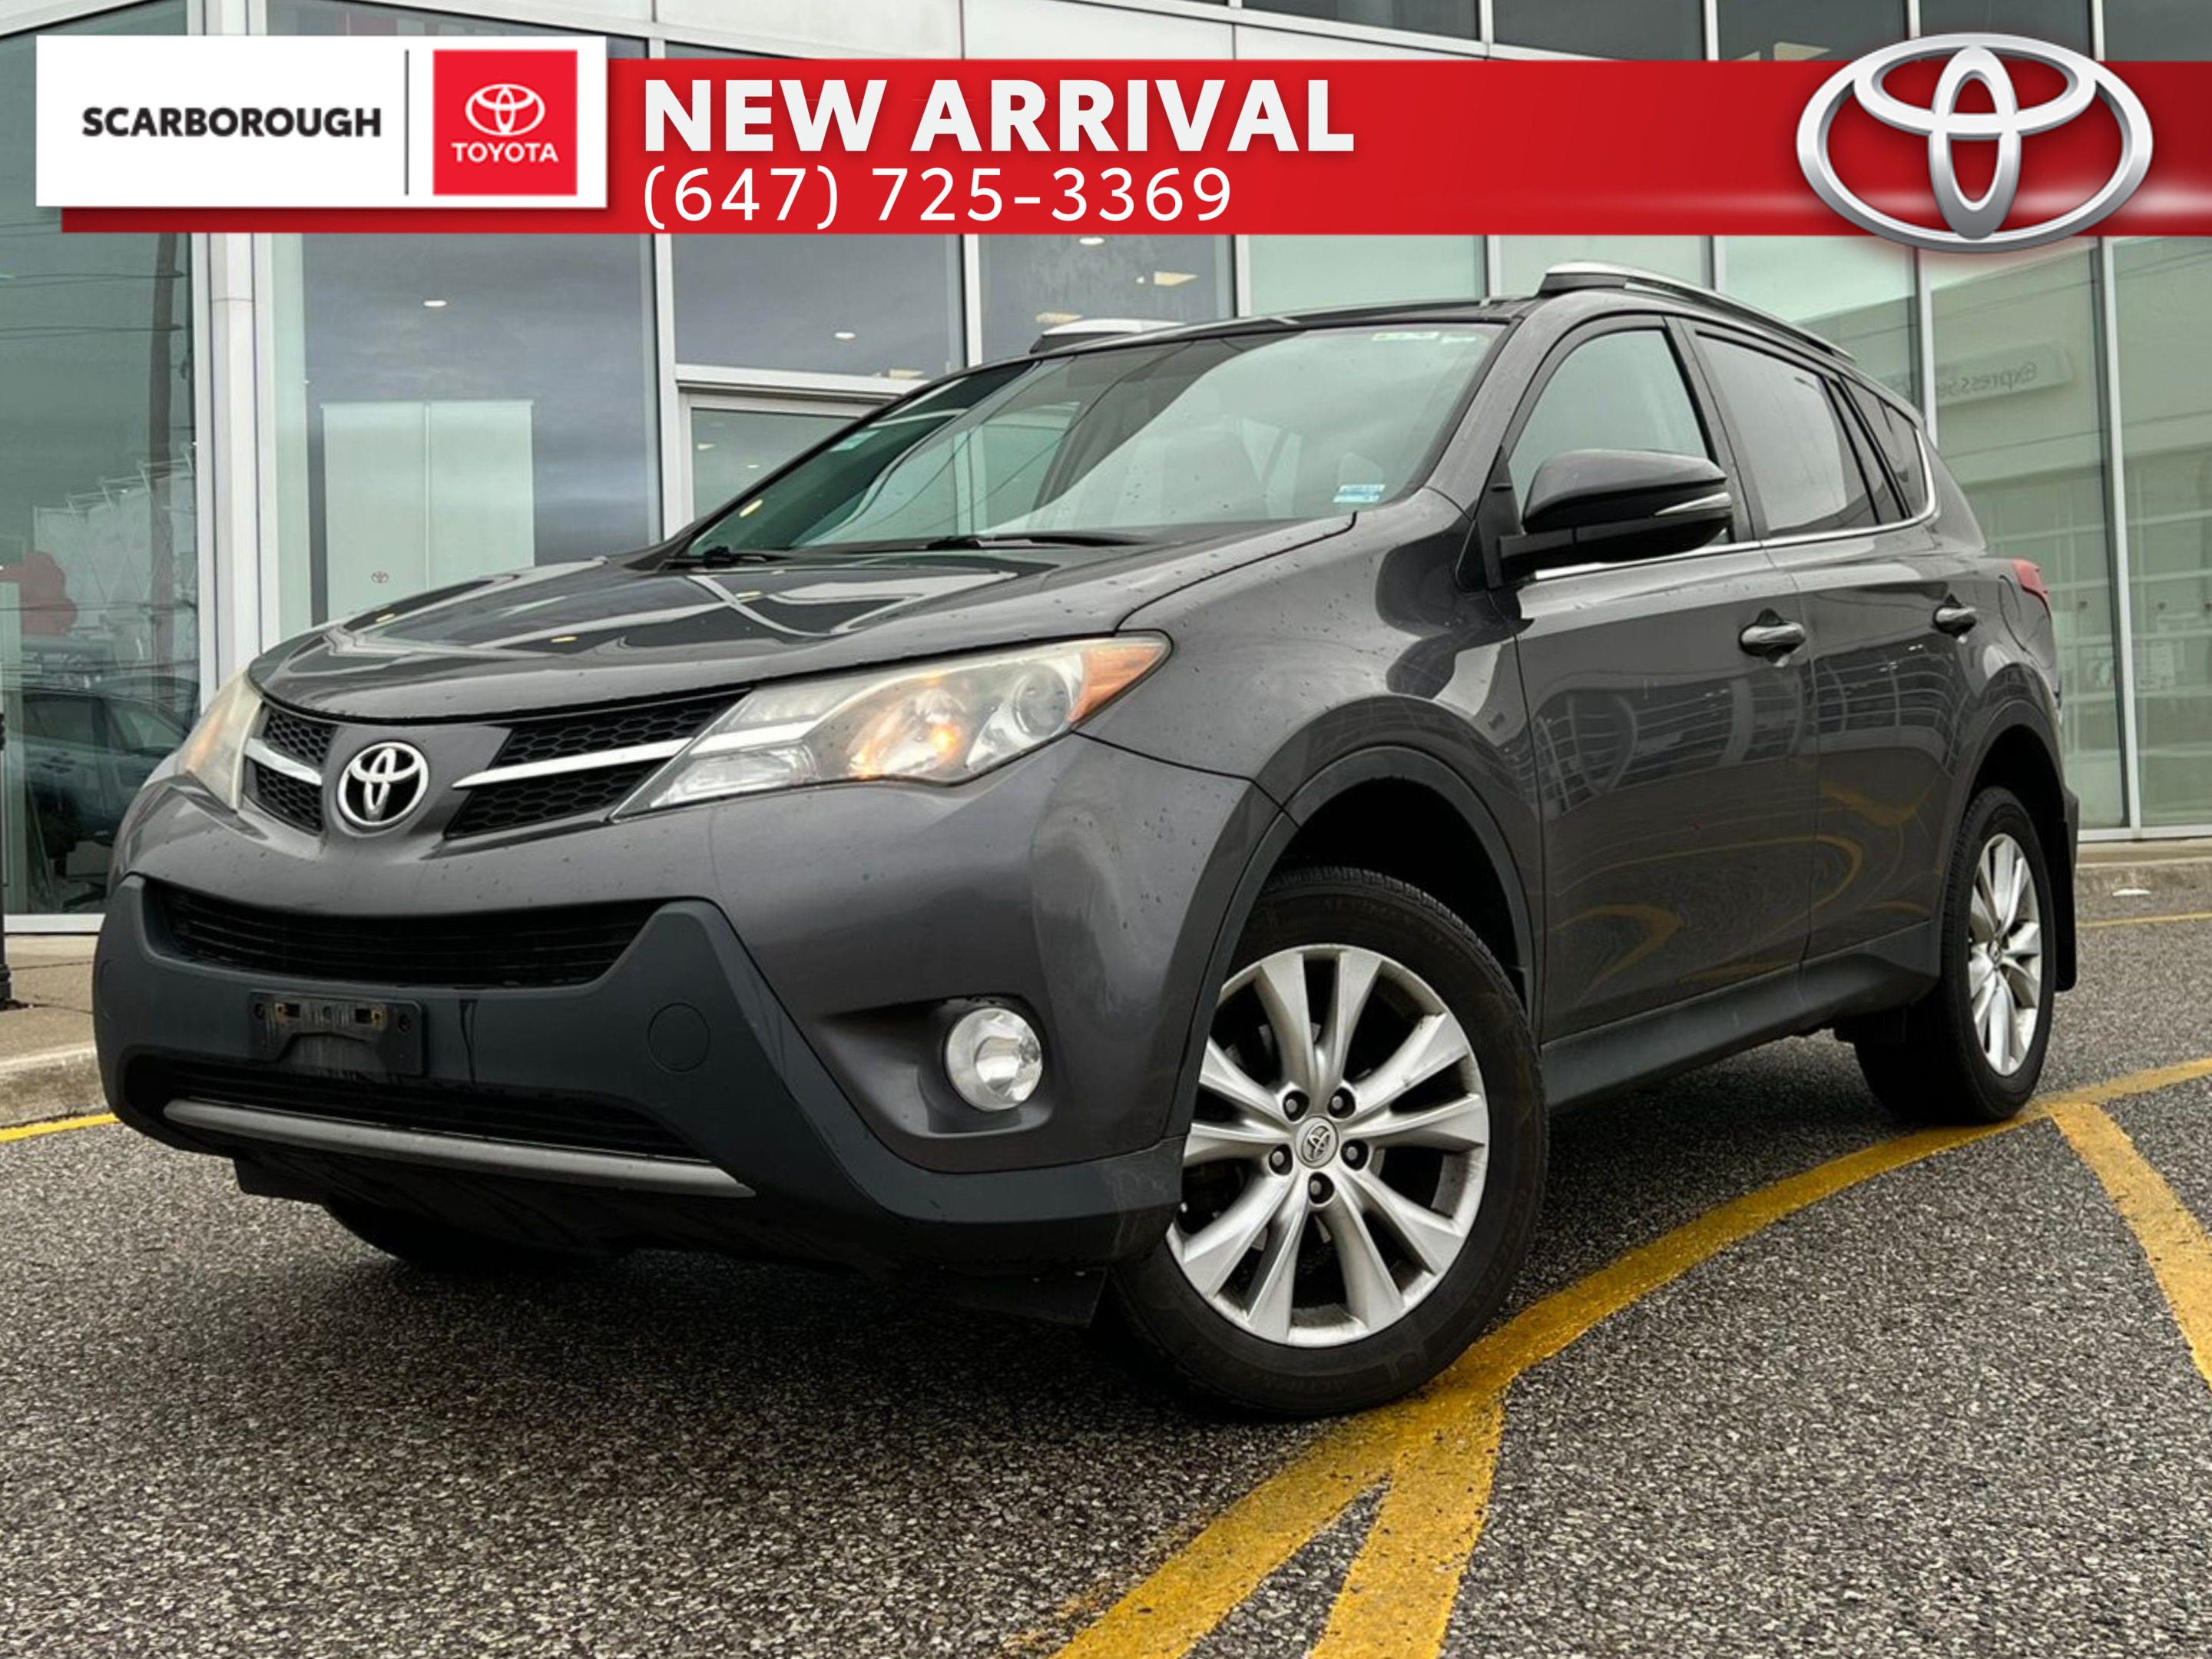 2013 Toyota RAV4 AWD 4dr Limited | Leather | Sunroof